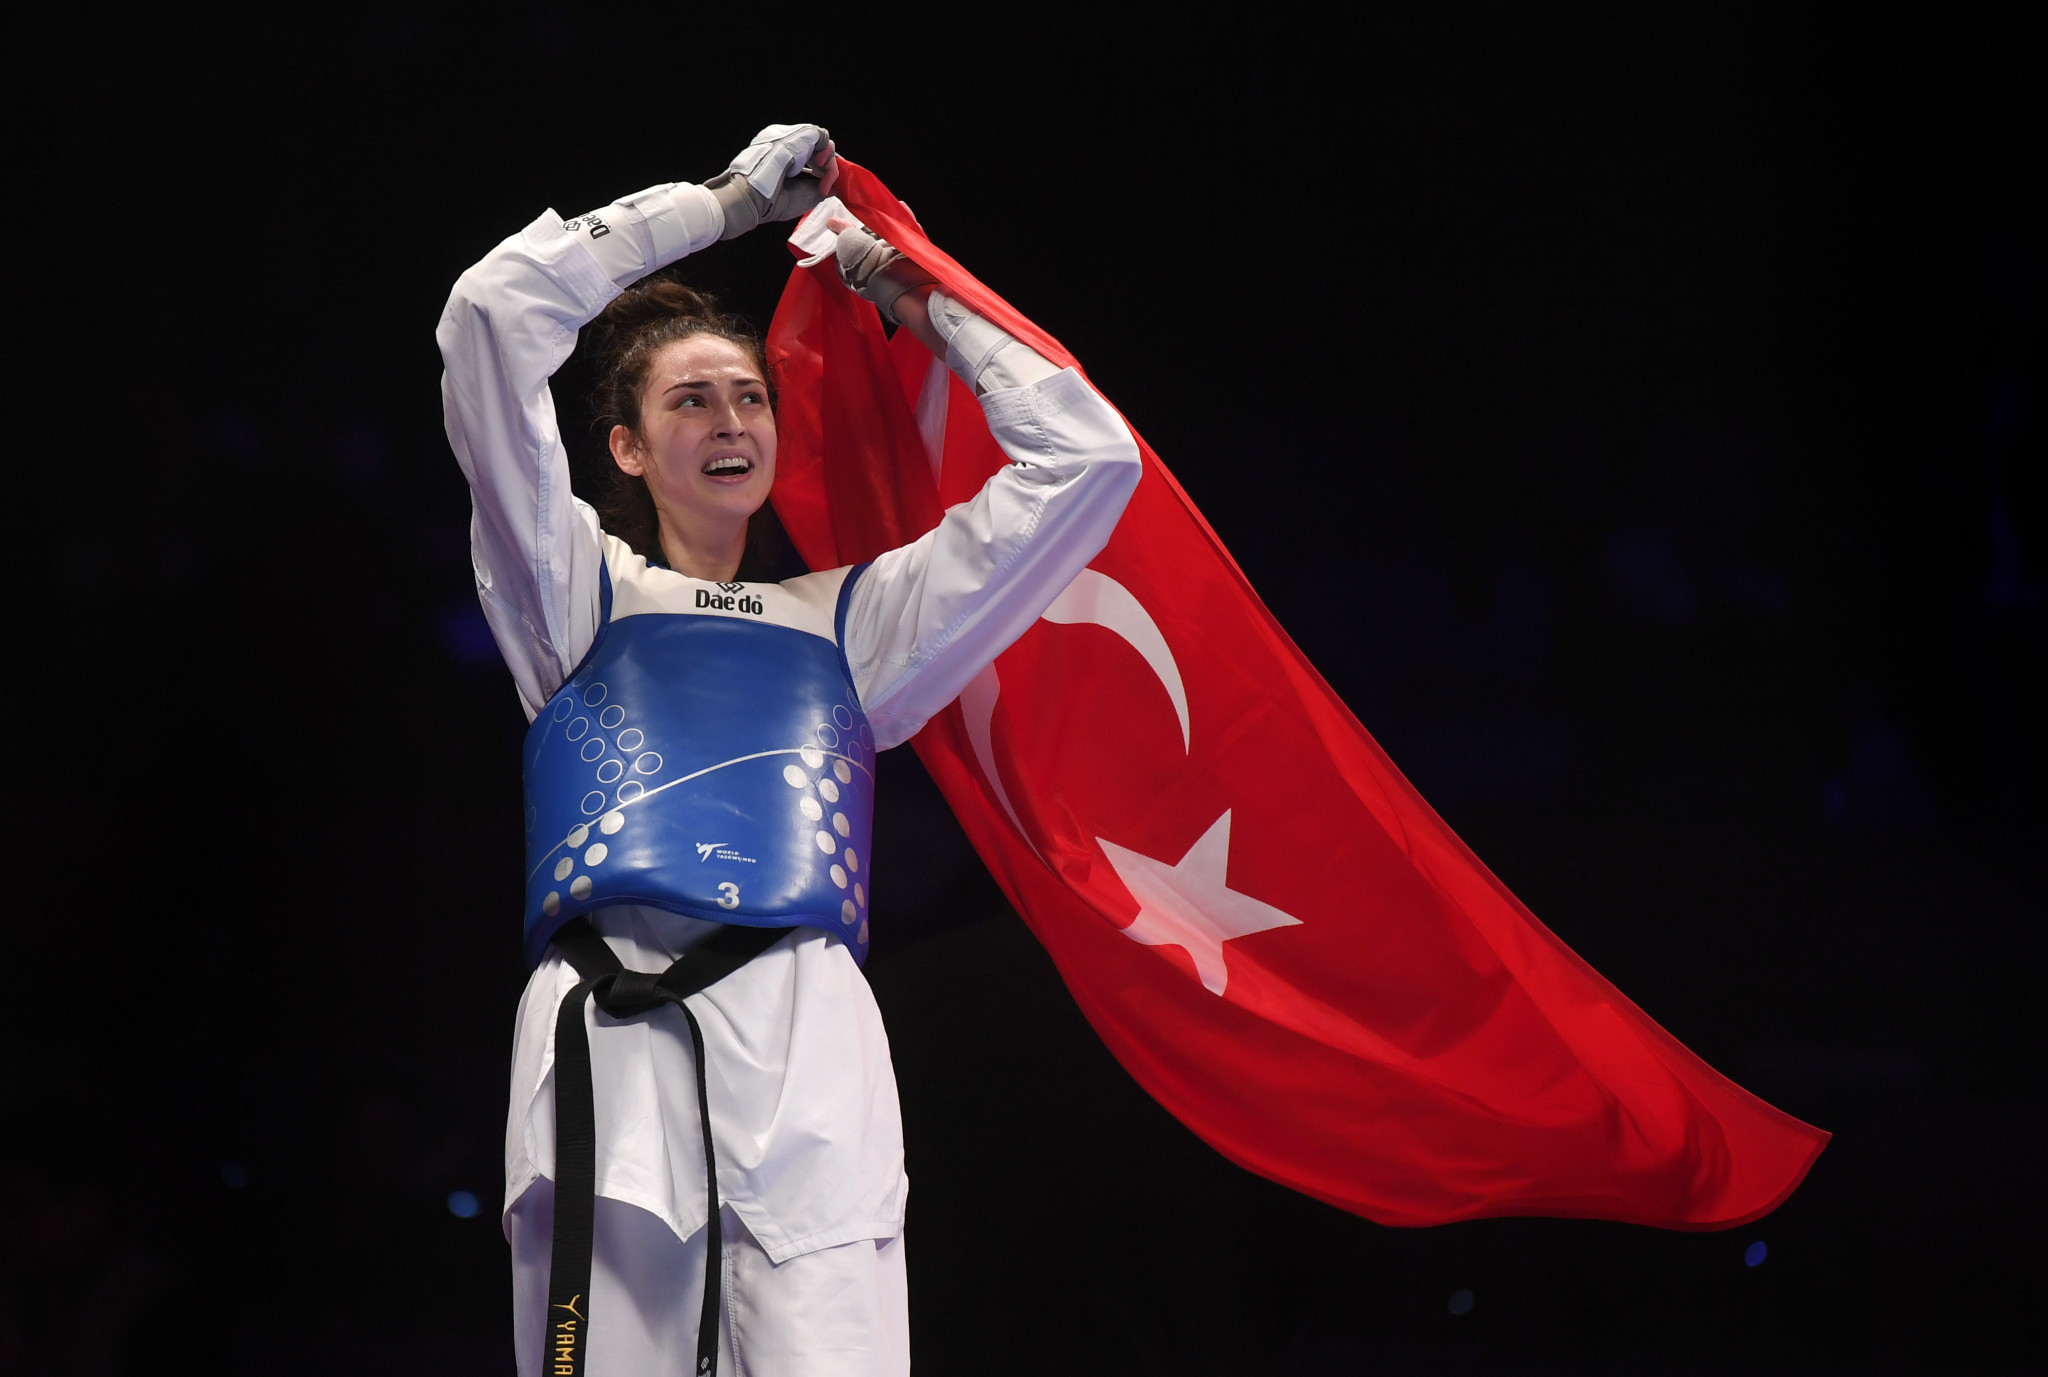 Turkey's Irem Yaman reclaimed the women's under-62kg world title, having won it in 2015 ©Getty Images